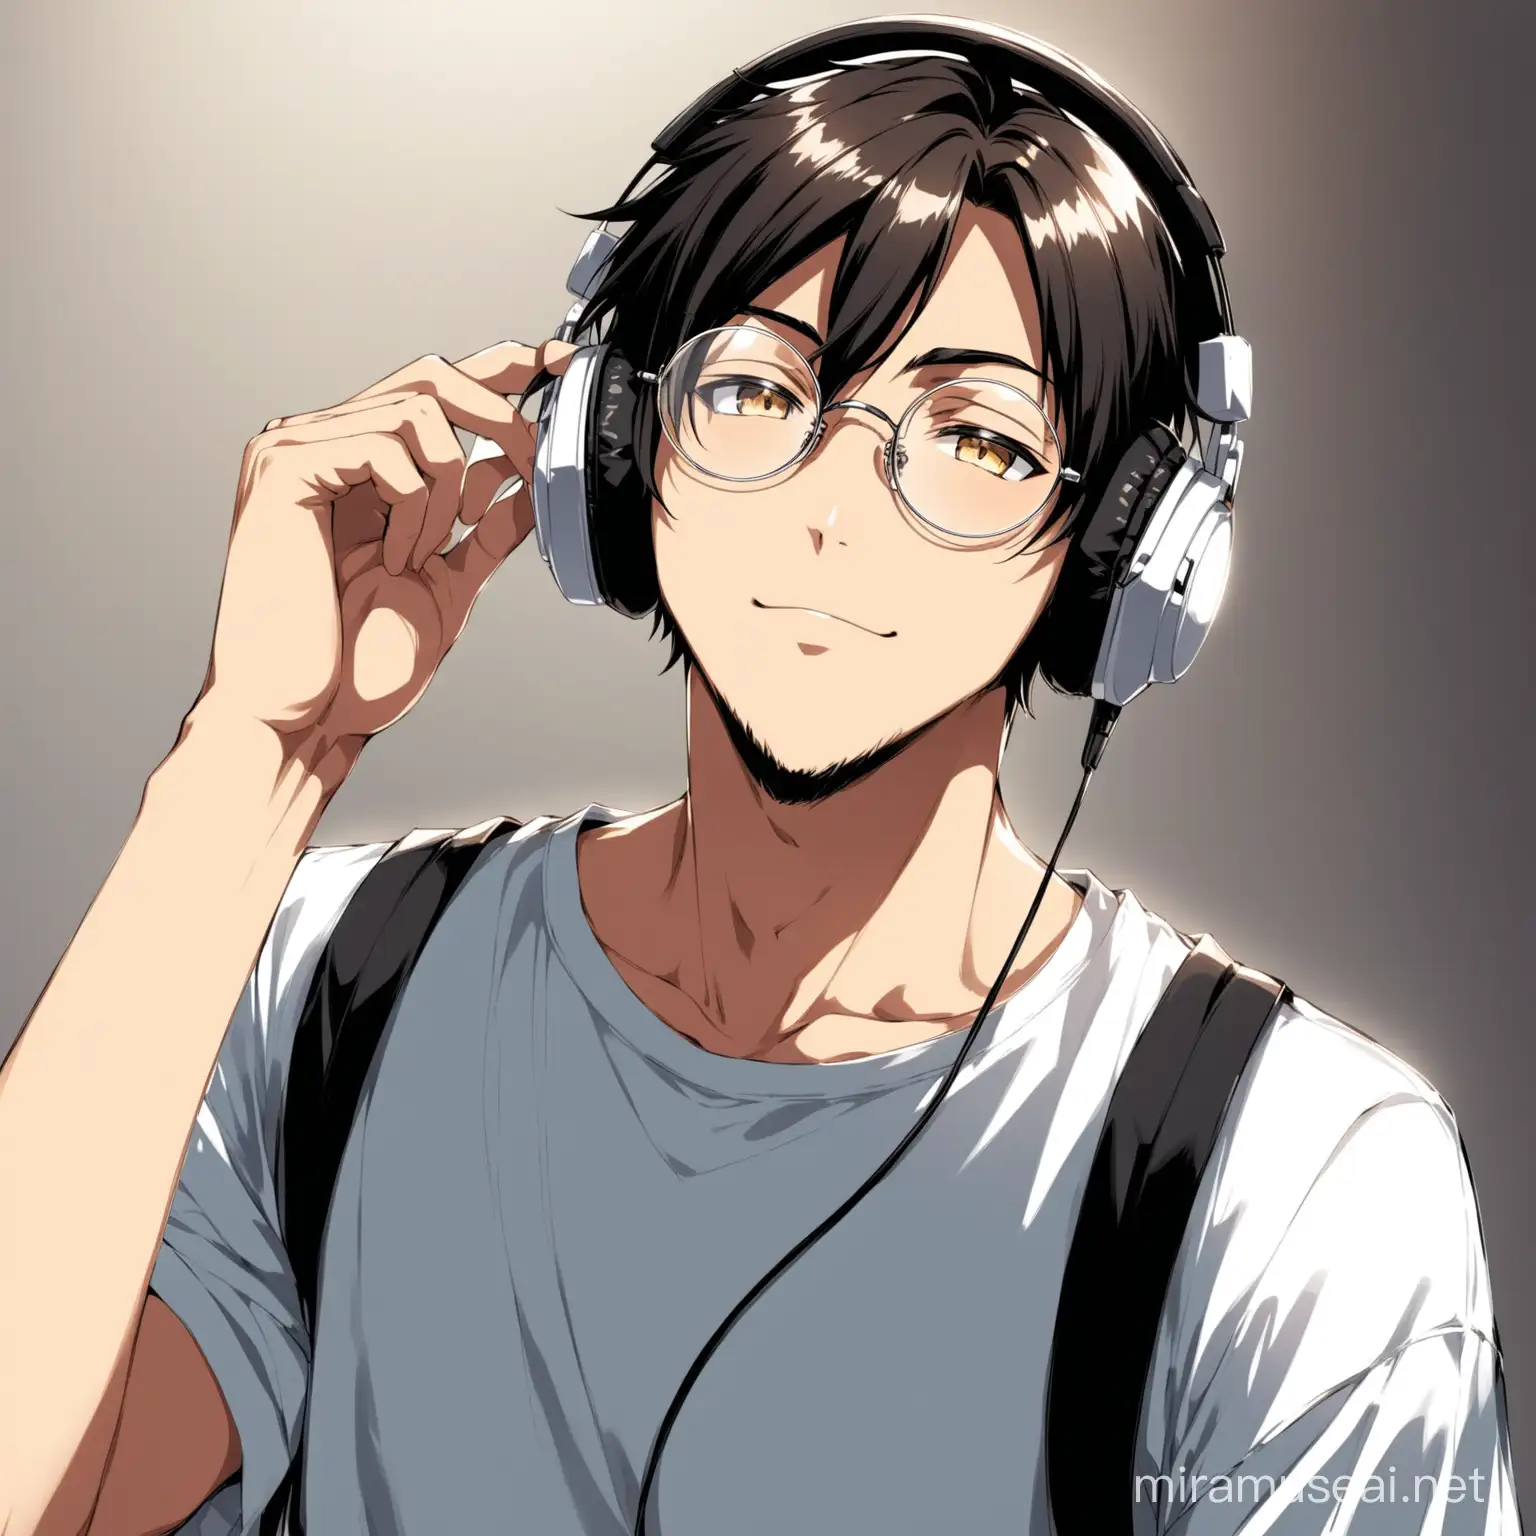 Stylish Anime Character with Round Glasses and Headphones